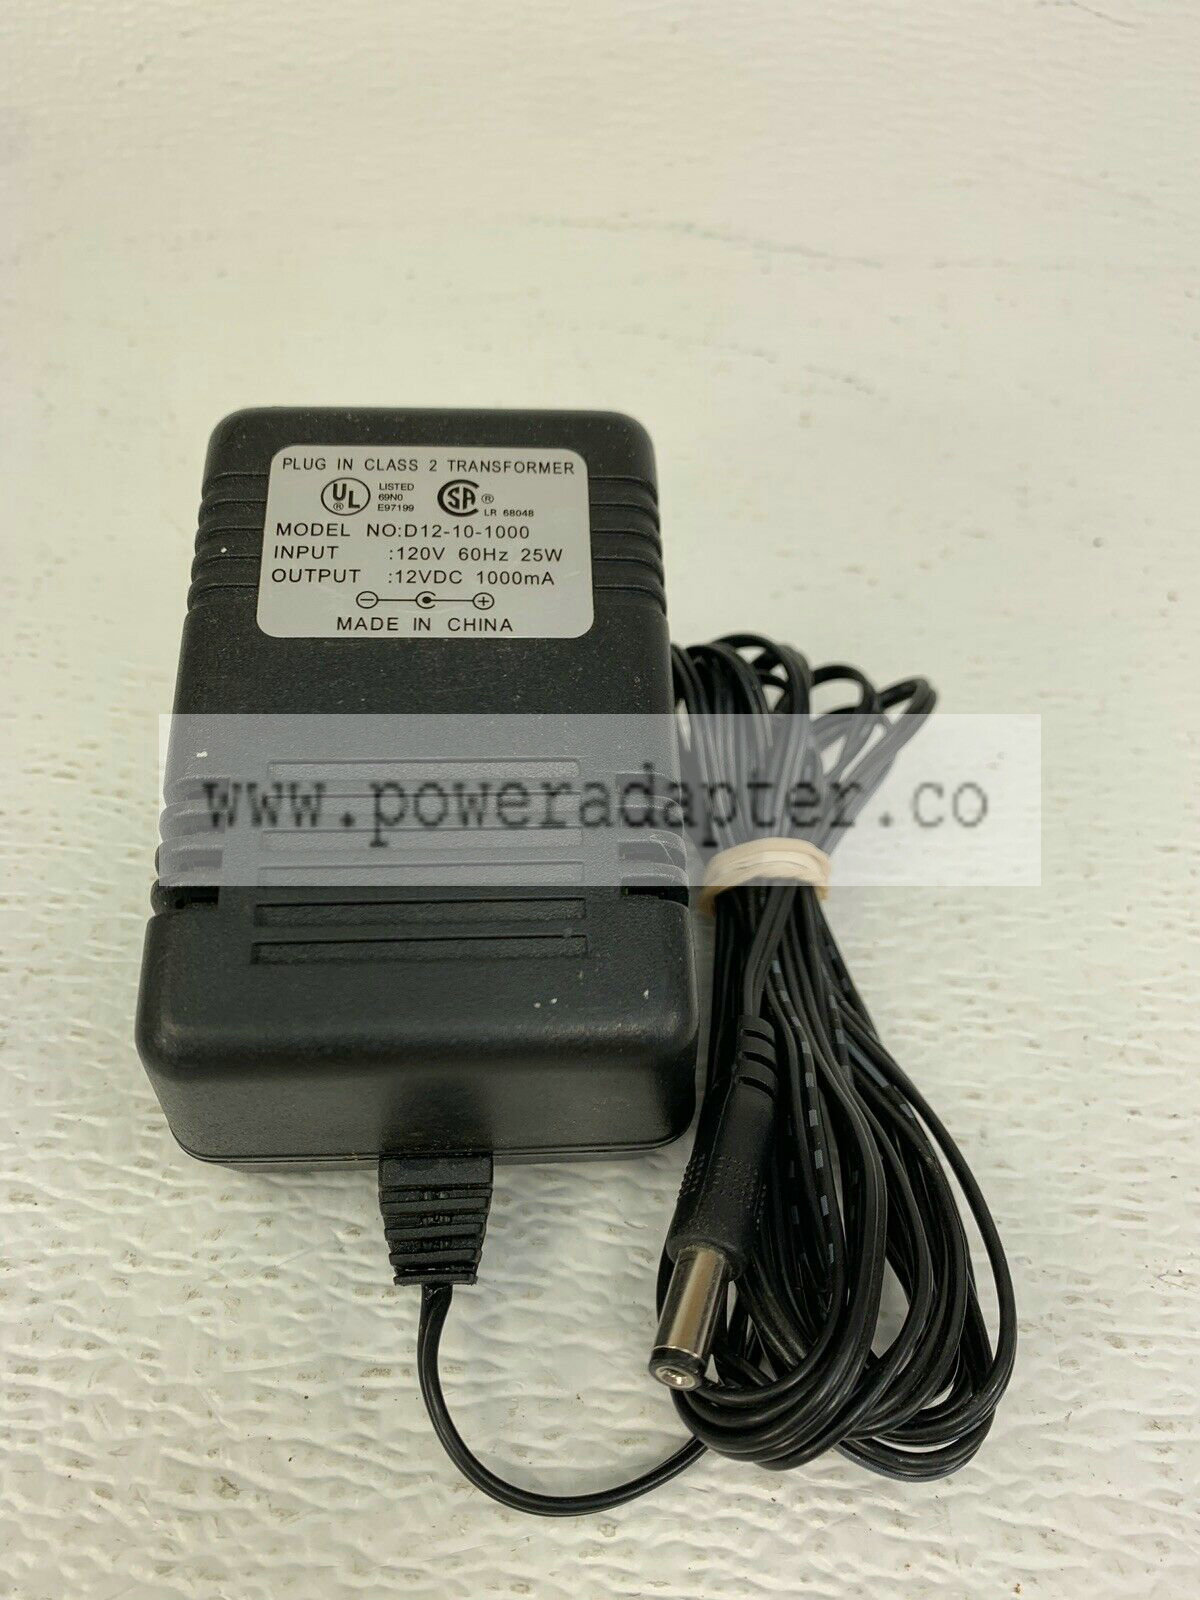 Vision Fitness Elliptical AC Adapter Power Supply Cord D12-10-1000-12 003478-A Brand: Hon-Kwang Type: AC to DC Mode